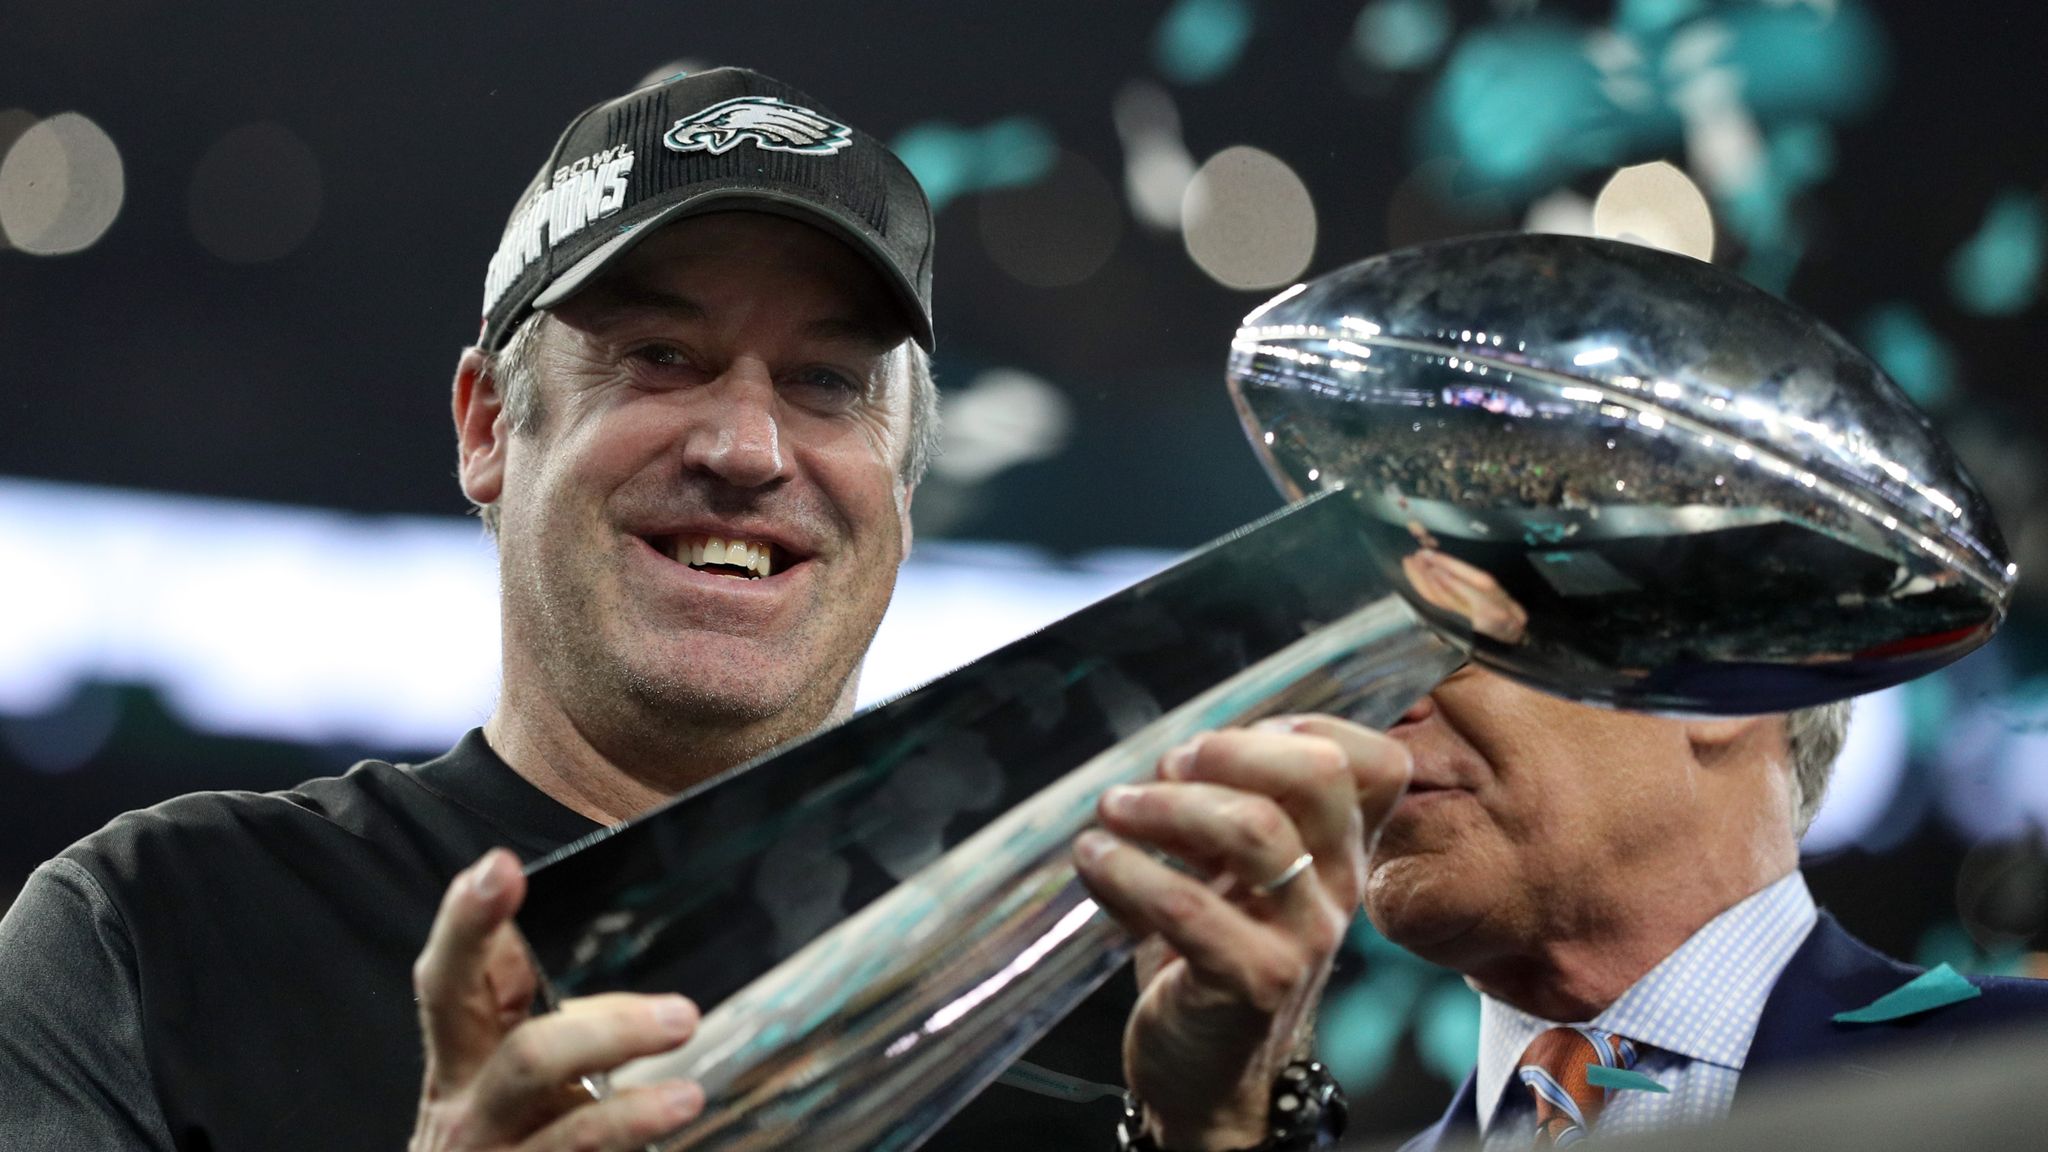 Philly special': Pederson's bold calls key to Eagles Super Bowl 52 win